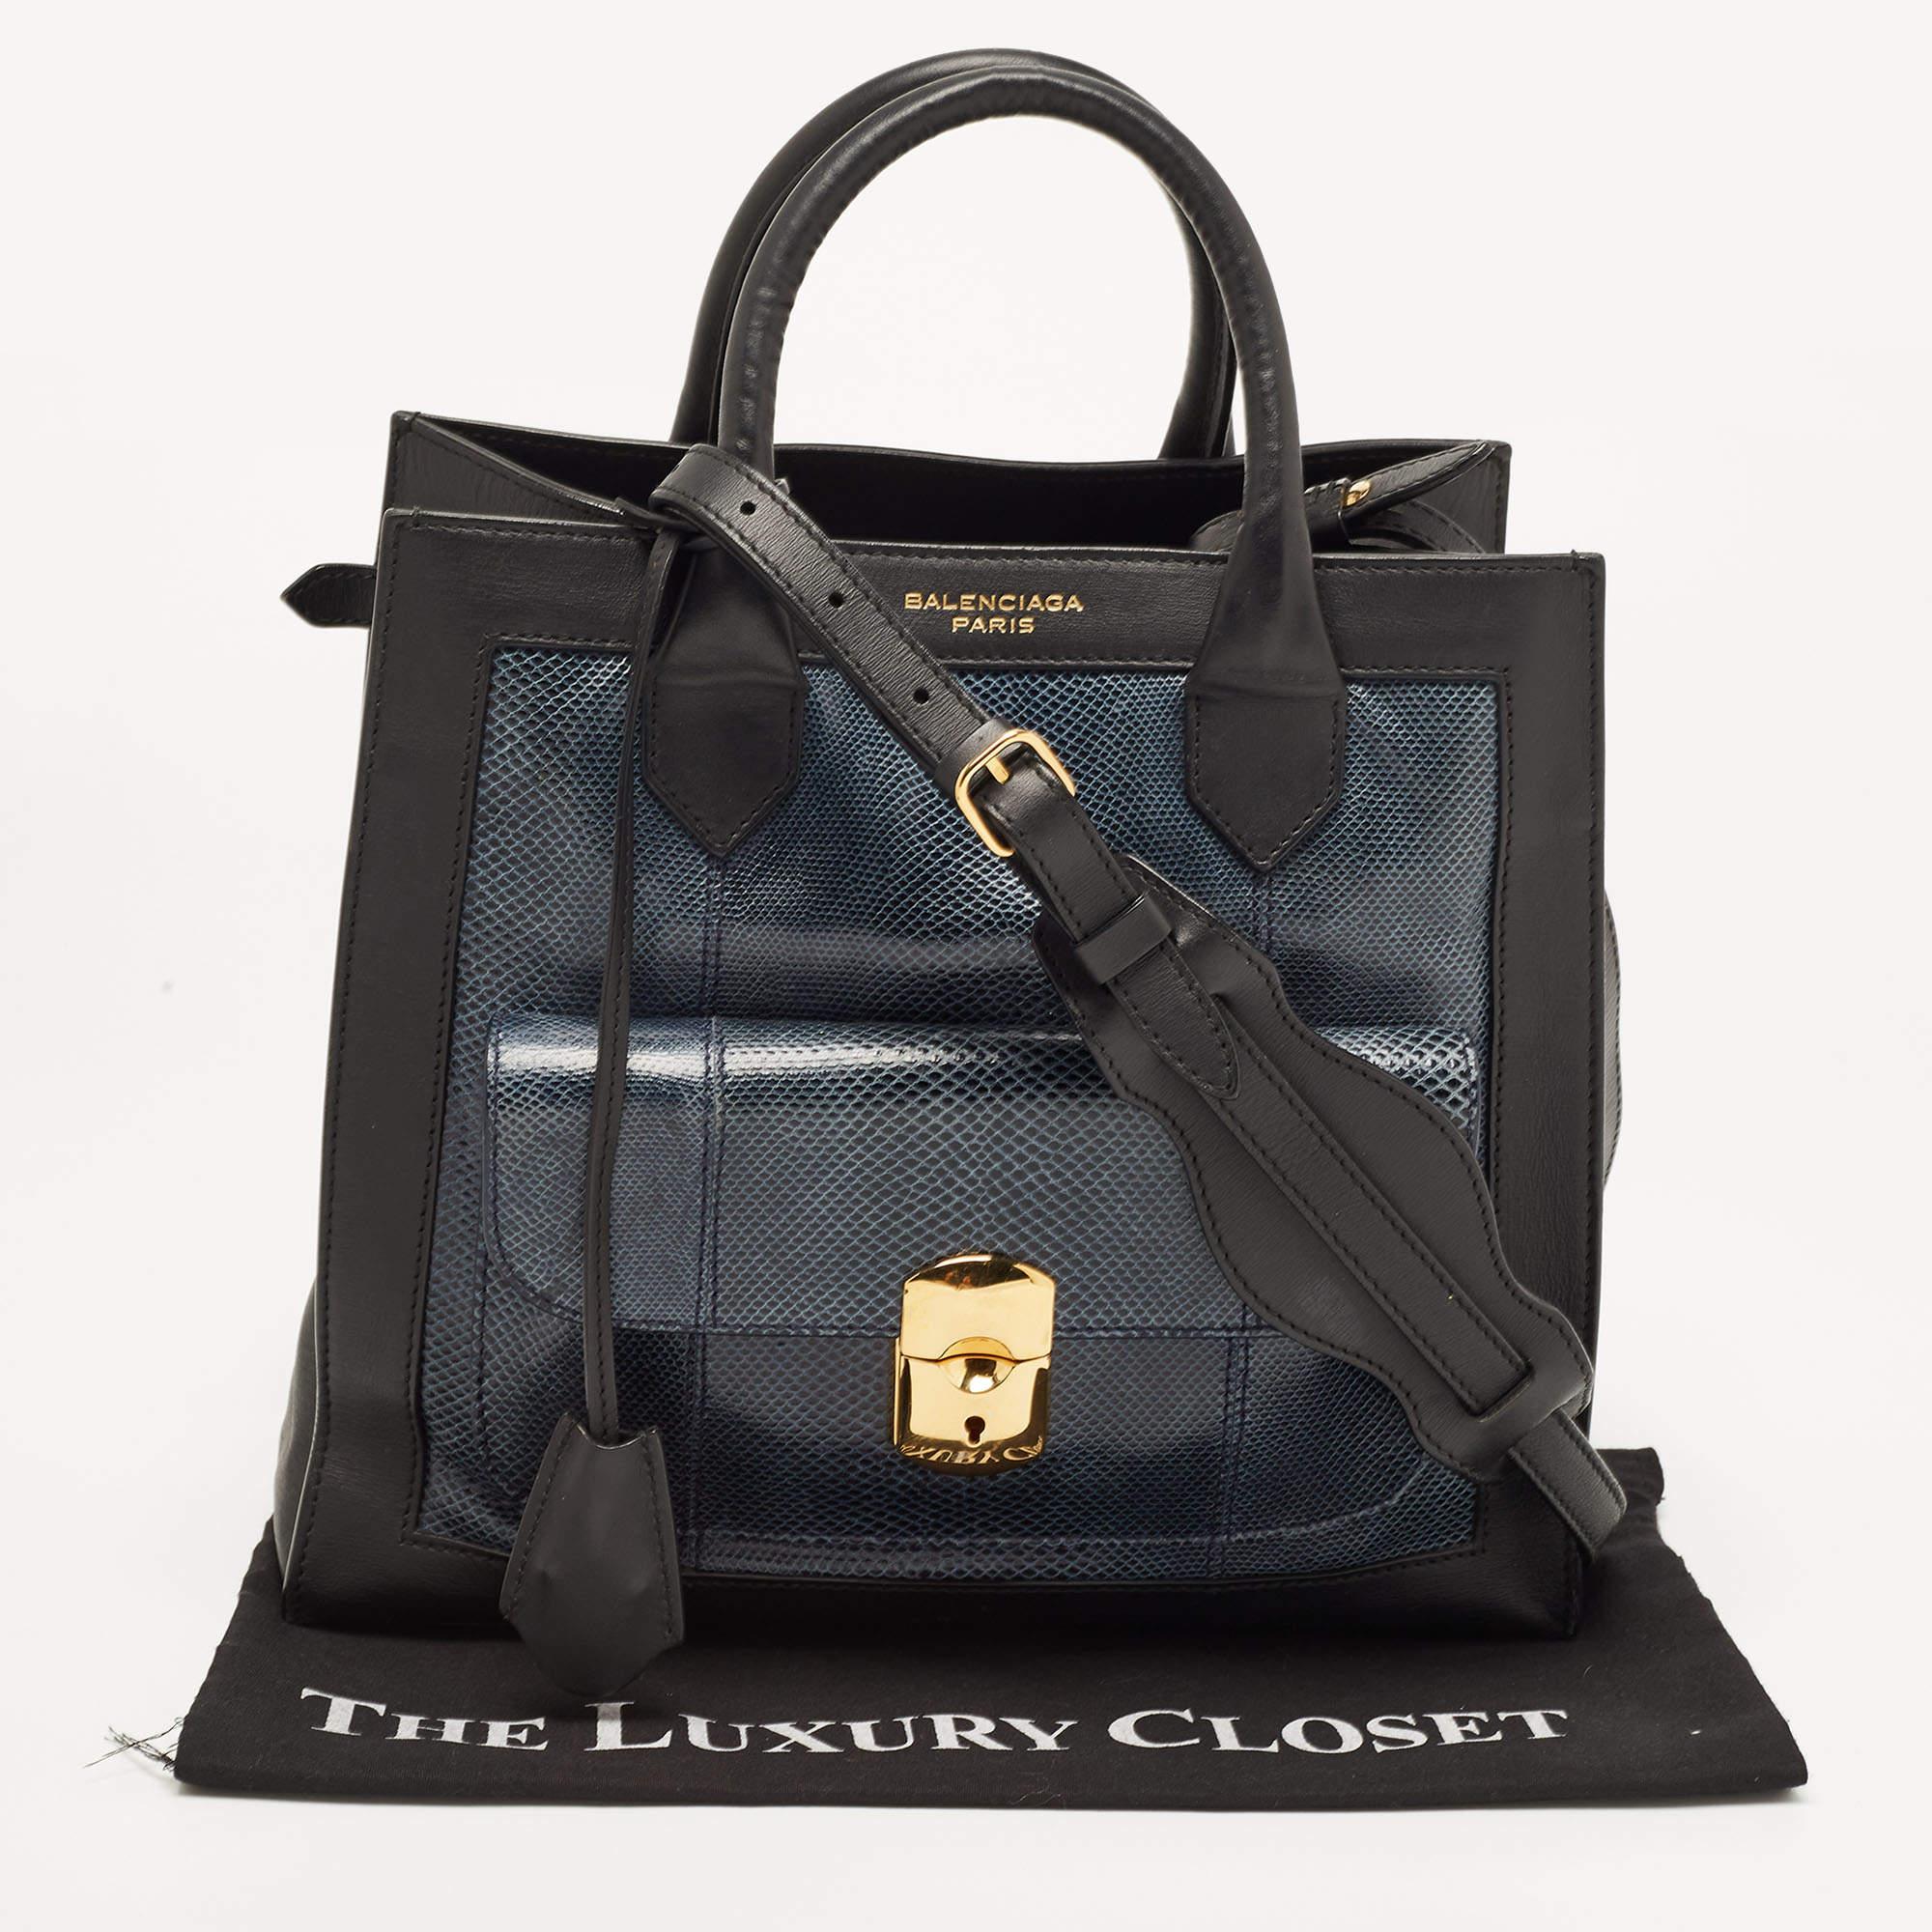 Balenciaga Black/Dark Blue Leather and Lizard Padlock All Afternoon Tote 15